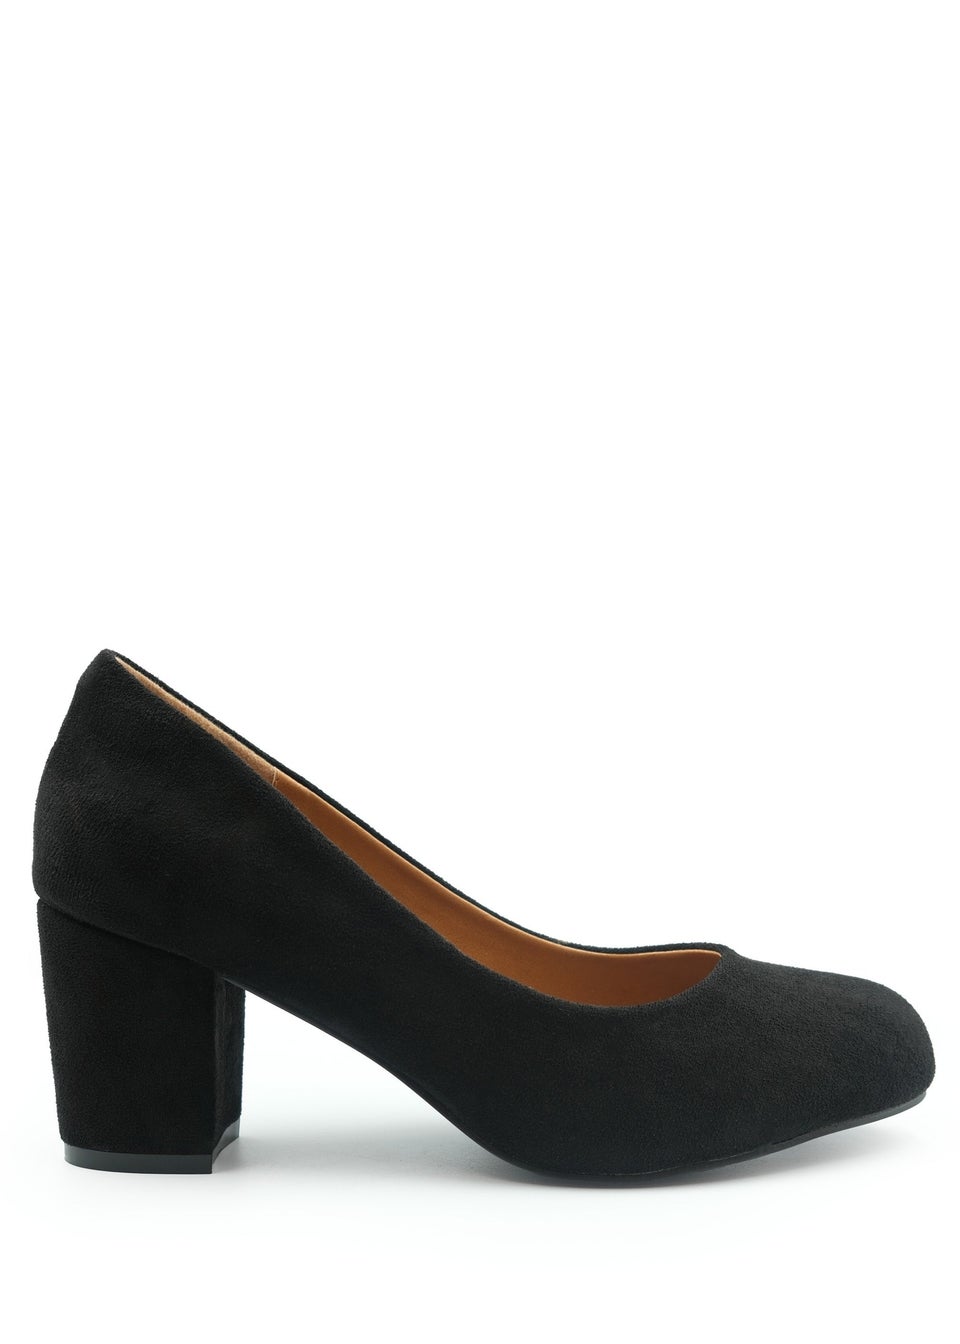 Where's That From Black Suede Melrose Block Heel Court Shoes